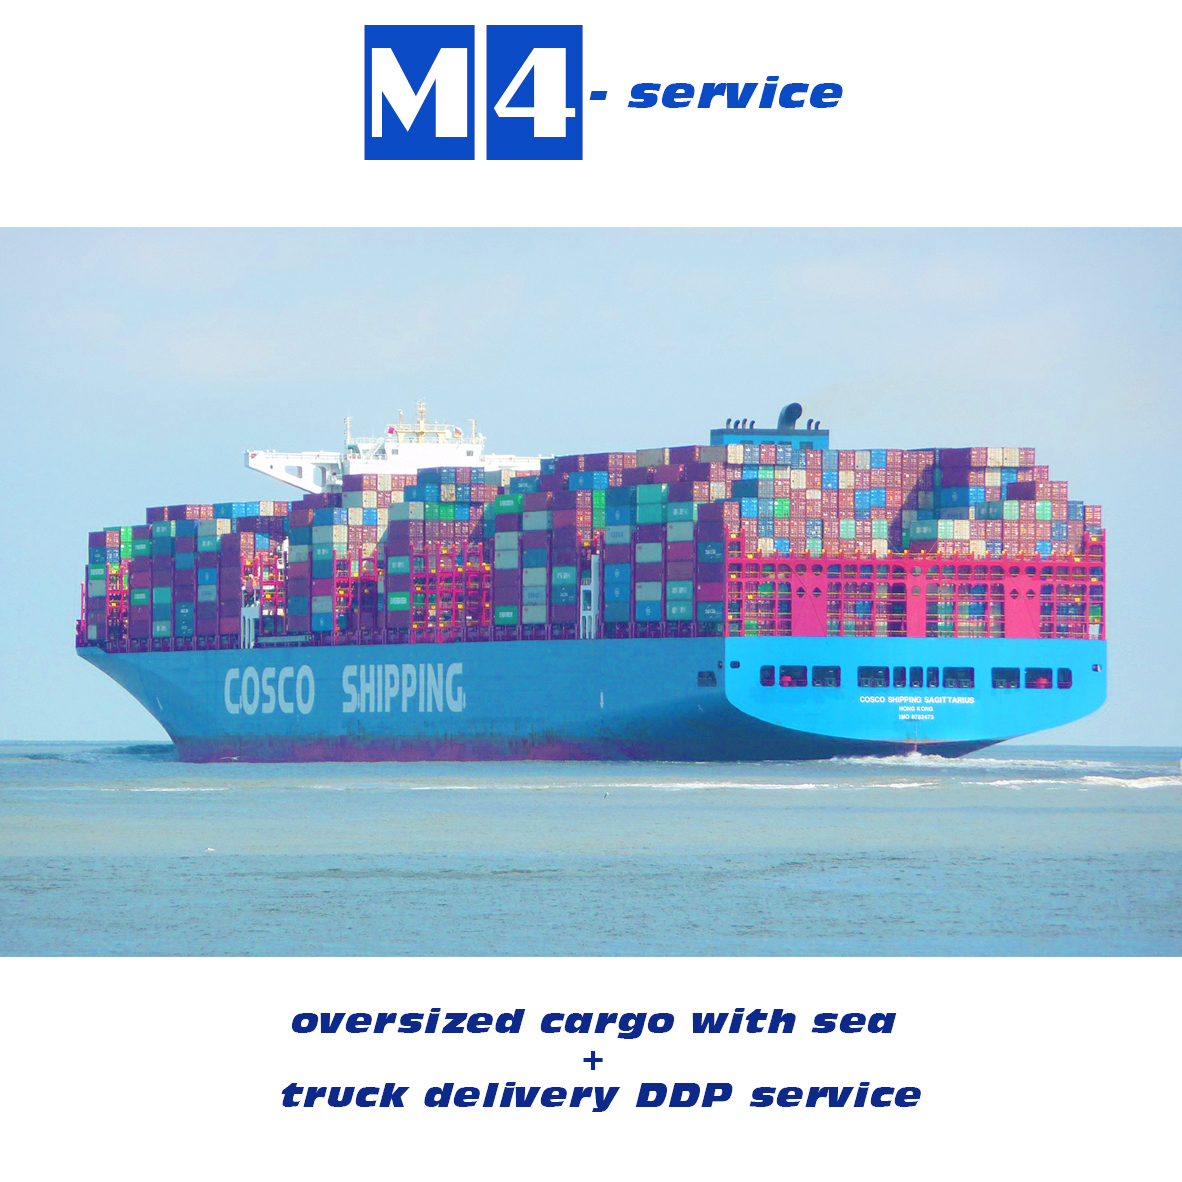 M4 channel for oversized cargo with sea + truck delivery DDP service